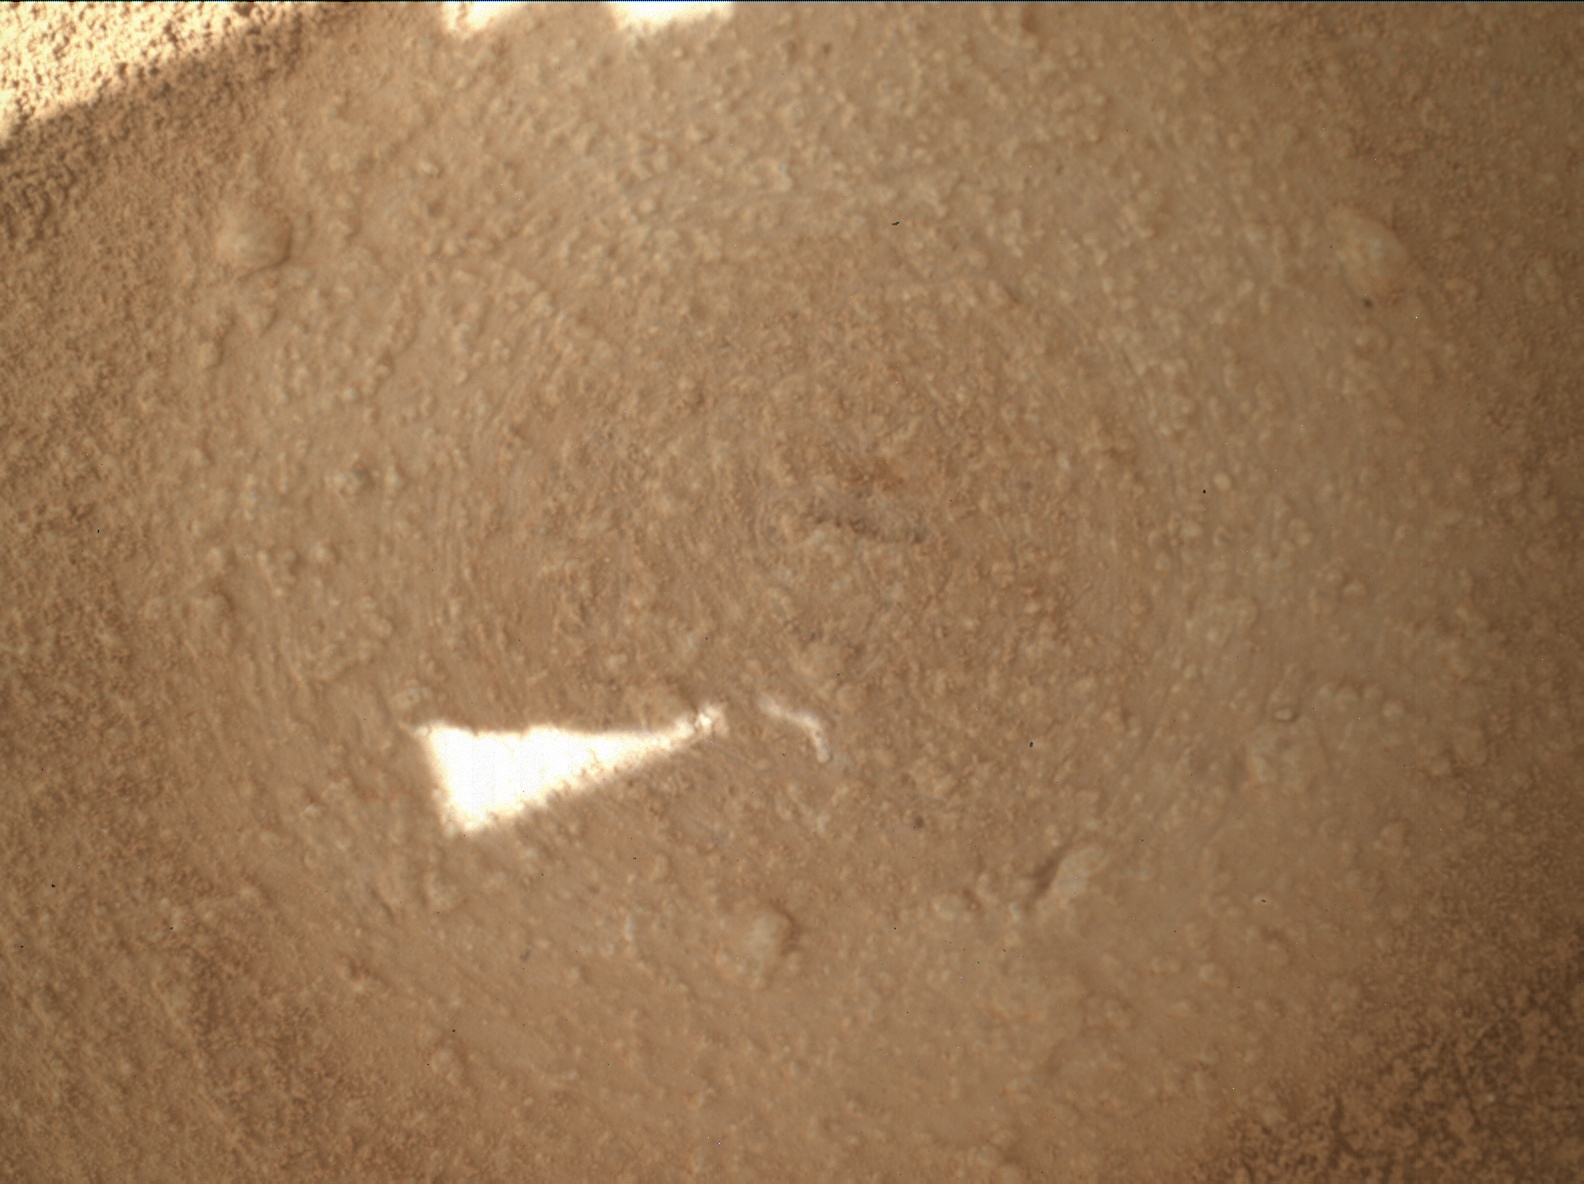 Nasa's Mars rover Curiosity acquired this image using its Mars Hand Lens Imager (MAHLI) on Sol 3796